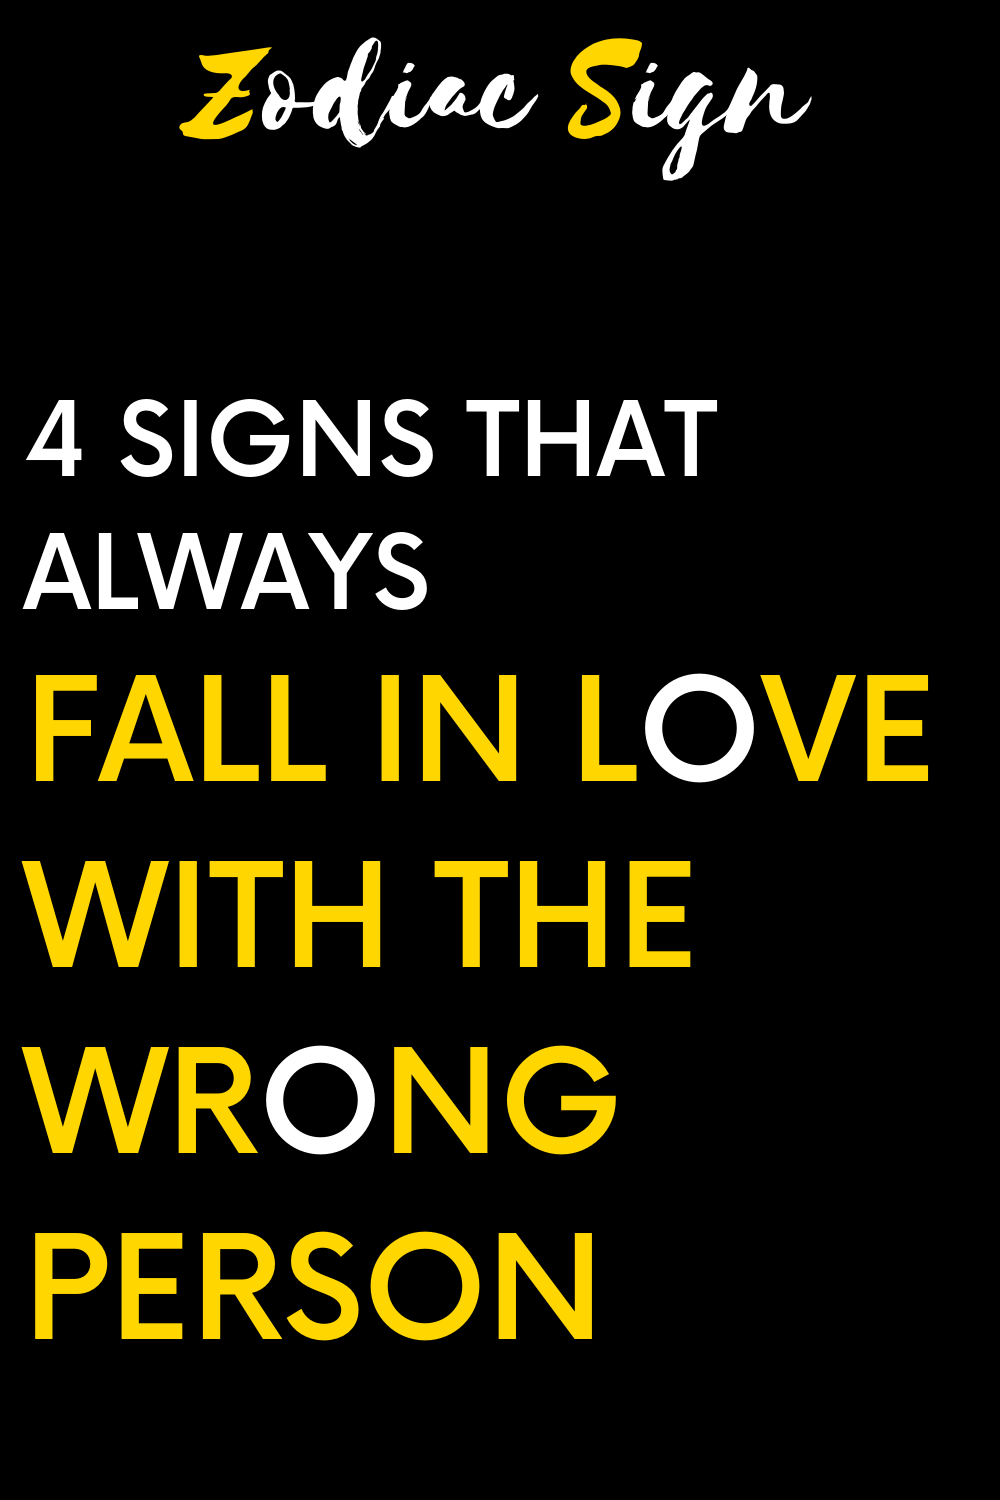 4 signs that always fall in love with the wrong person